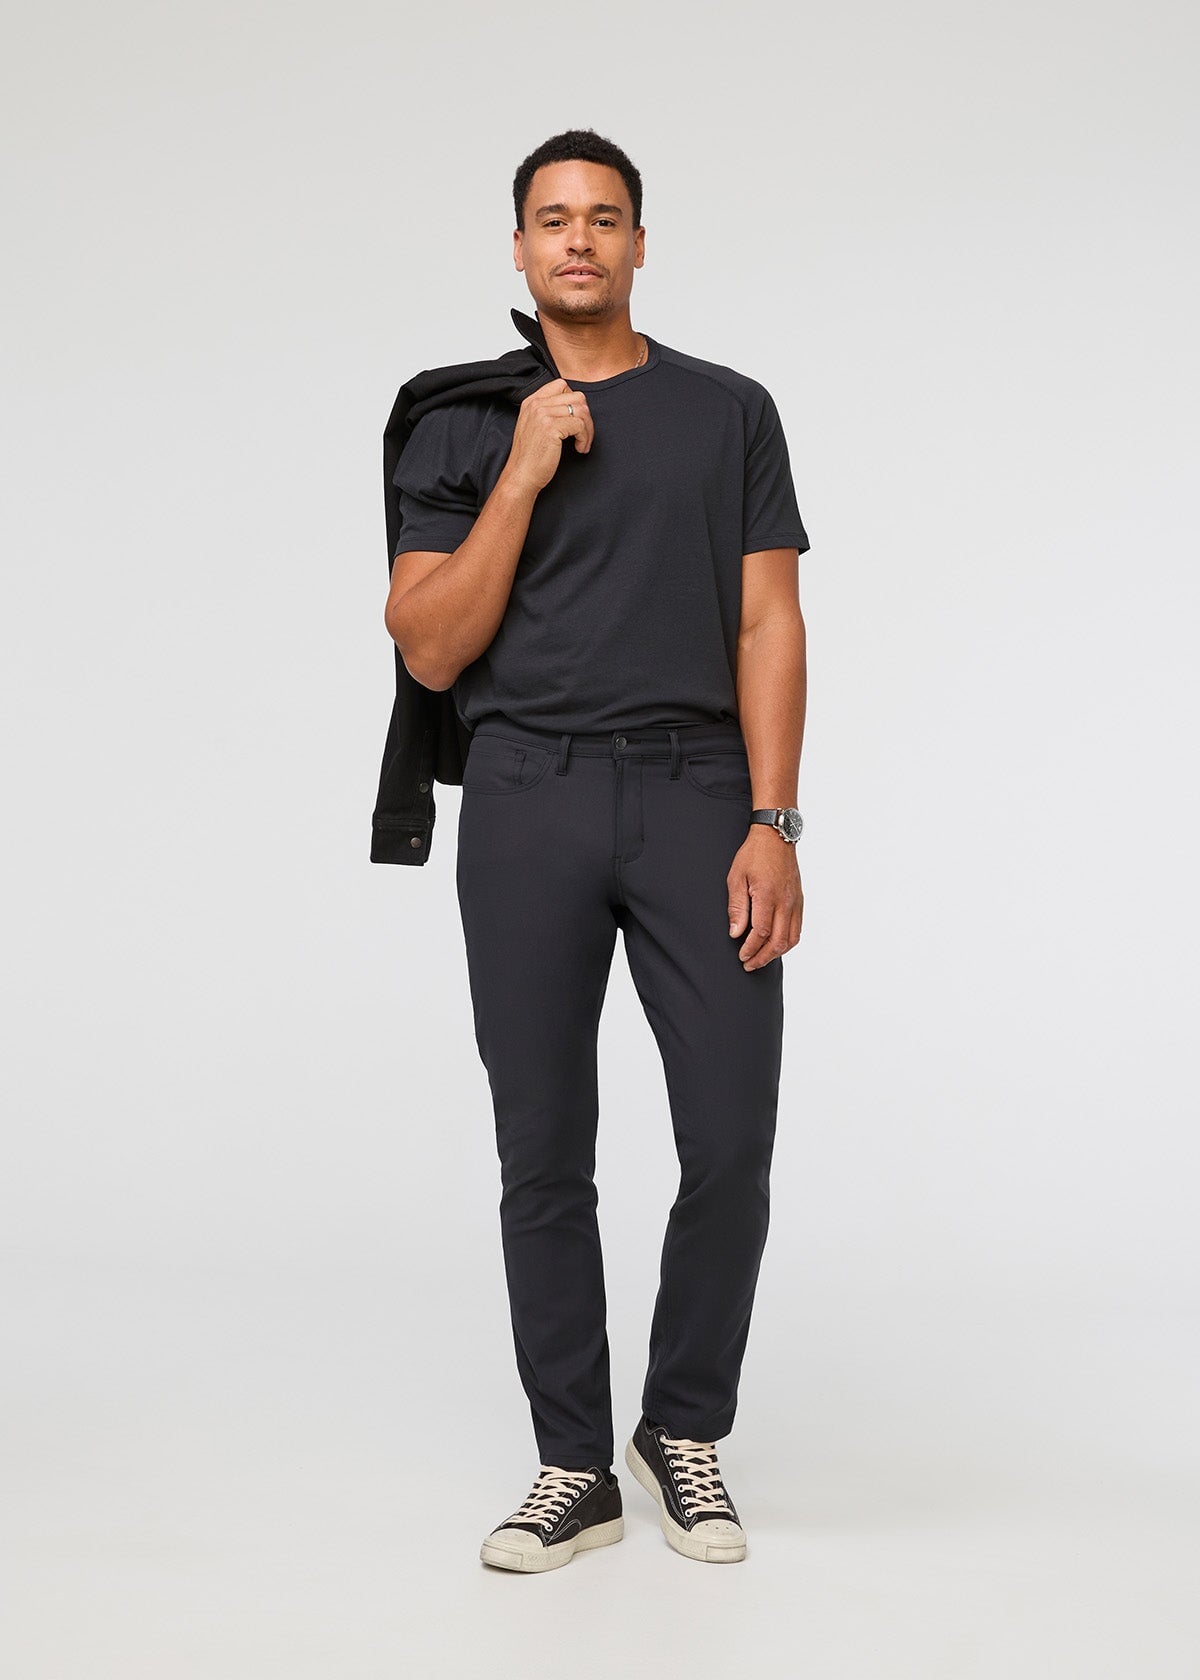 Men's Business Casual Clothing - DUER